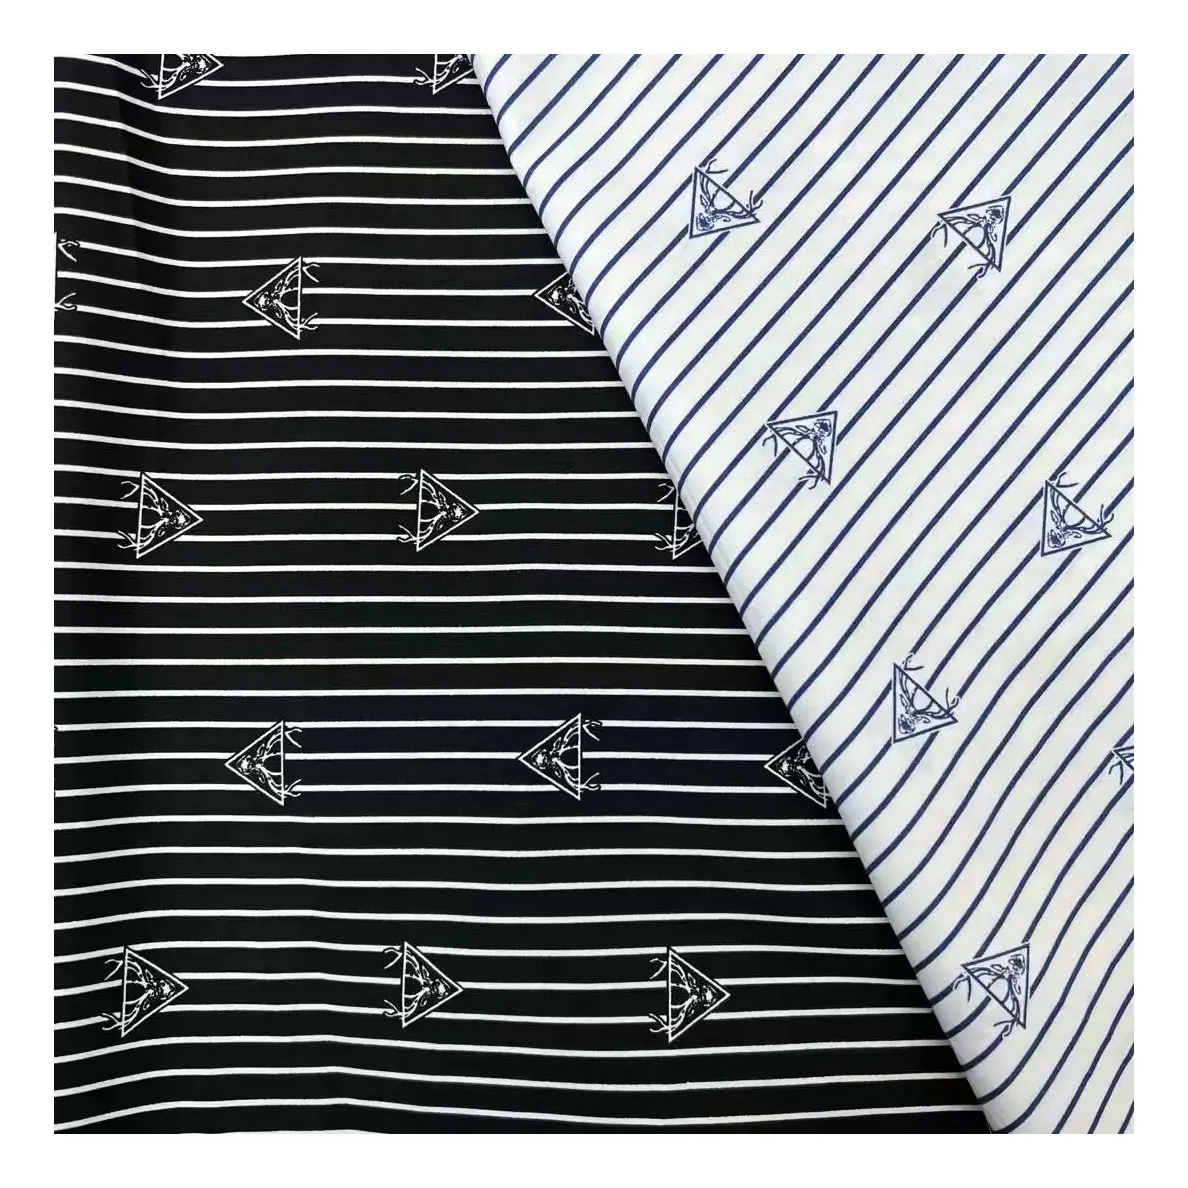 One sided striped children's wear/men's T-shirt casual suit 100 combed cotton printed fabric woven